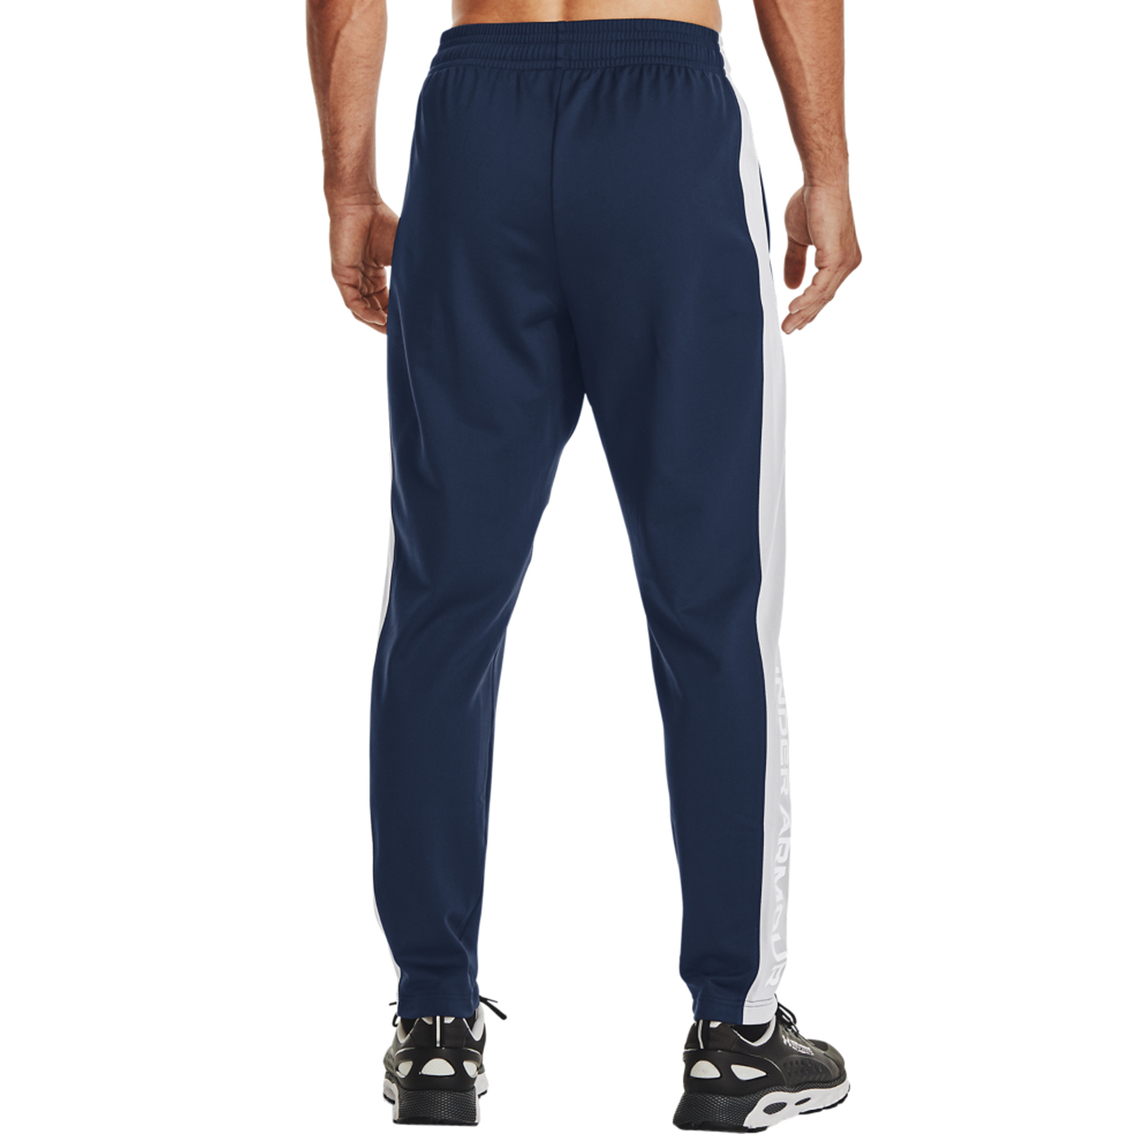 Under Armour 31 In. Brawler Pants | Pants | Clothing & Accessories ...